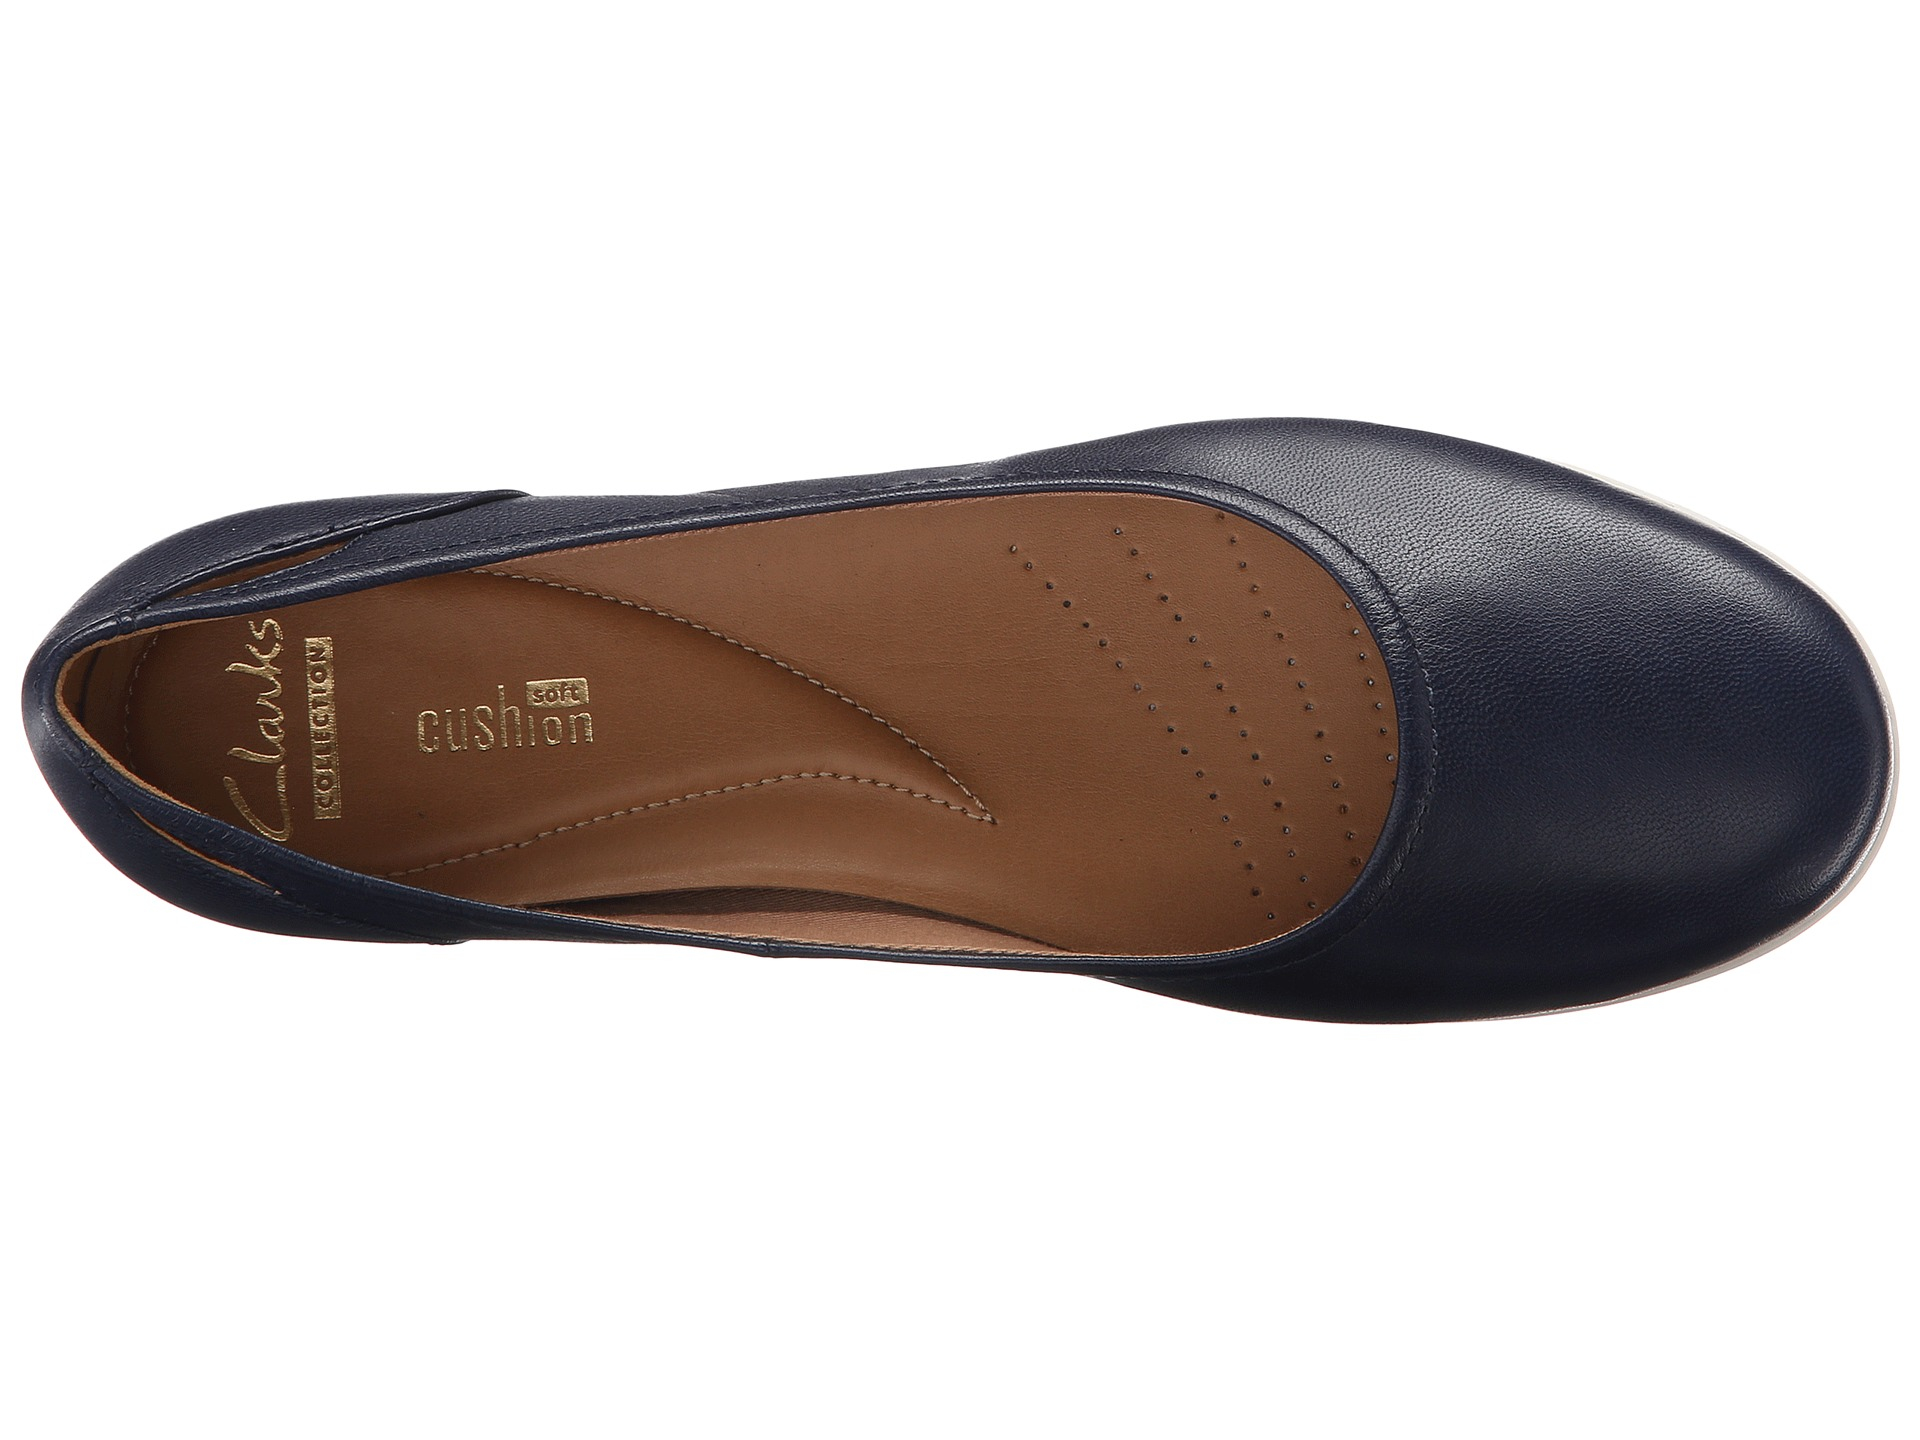 clarks navy flat shoes